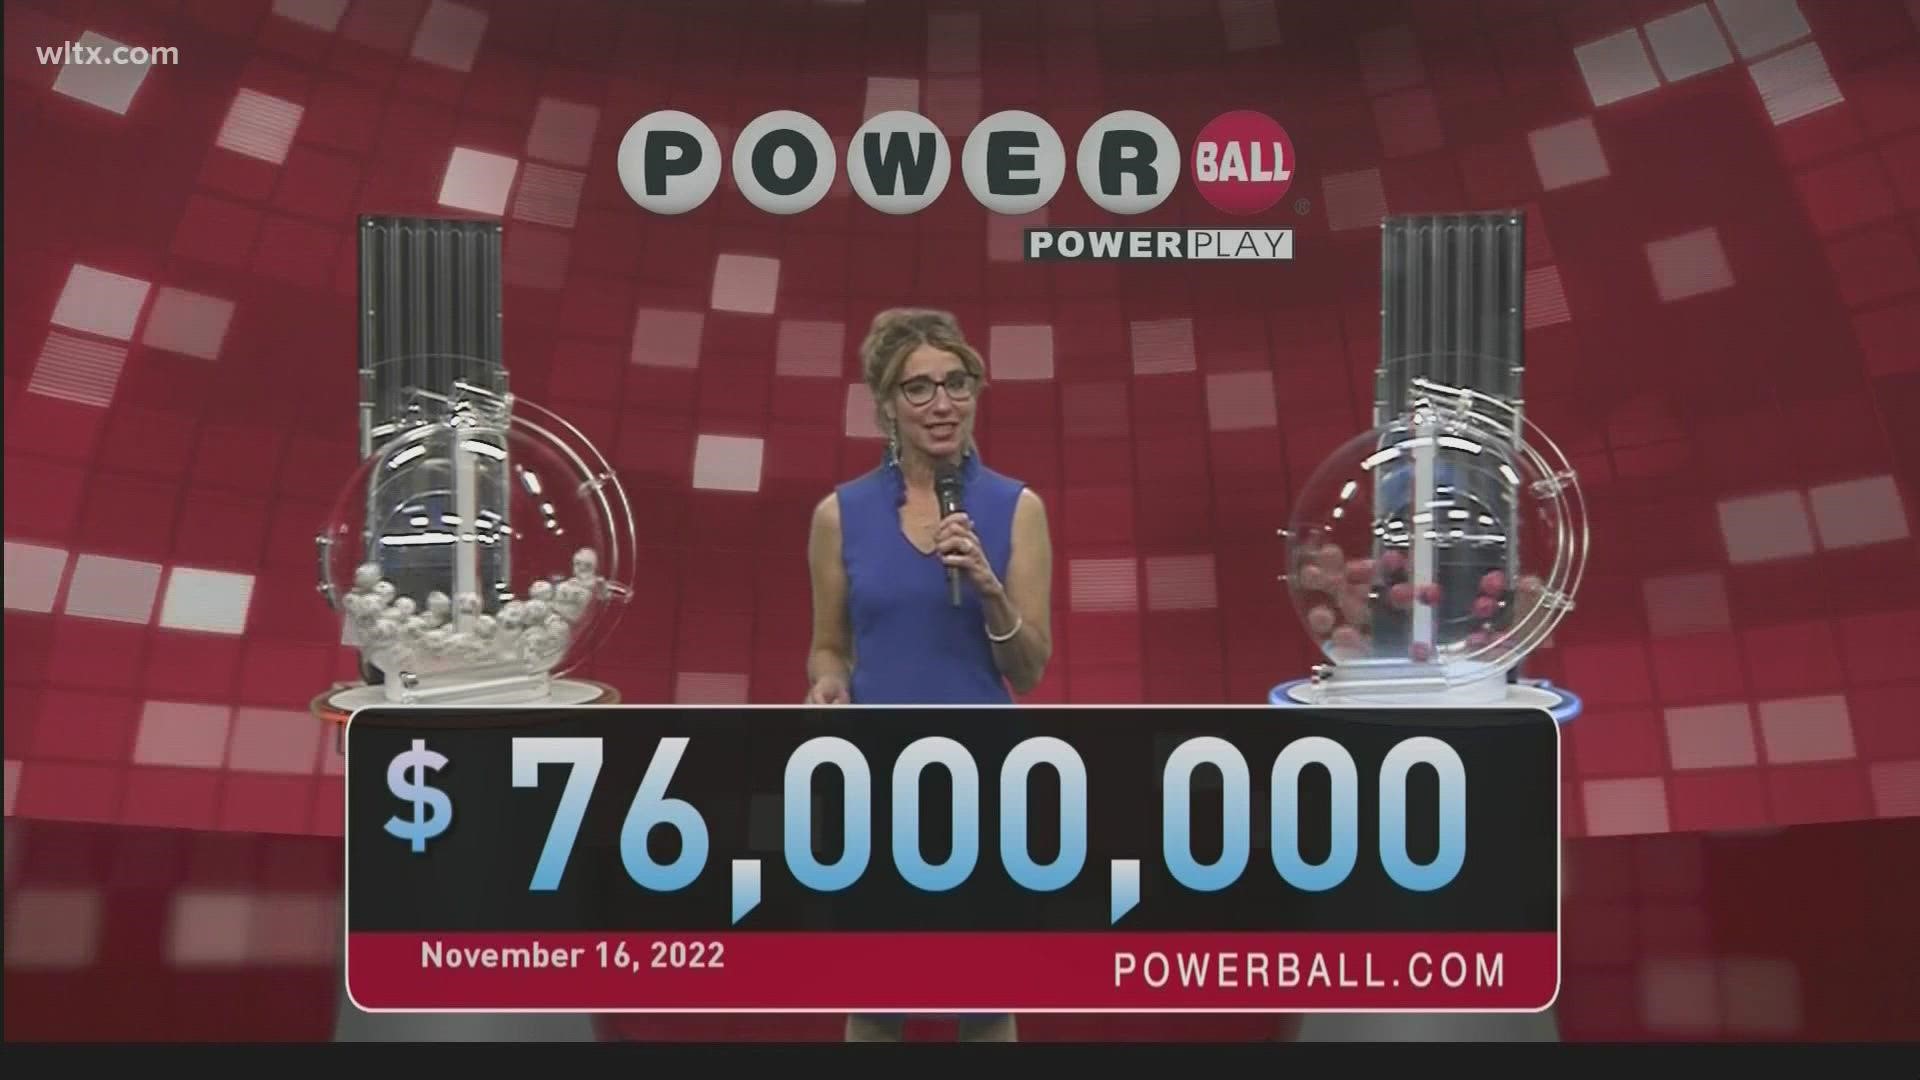 Here are the winning Powerball numbers for Wednesday, November 16, 2022.